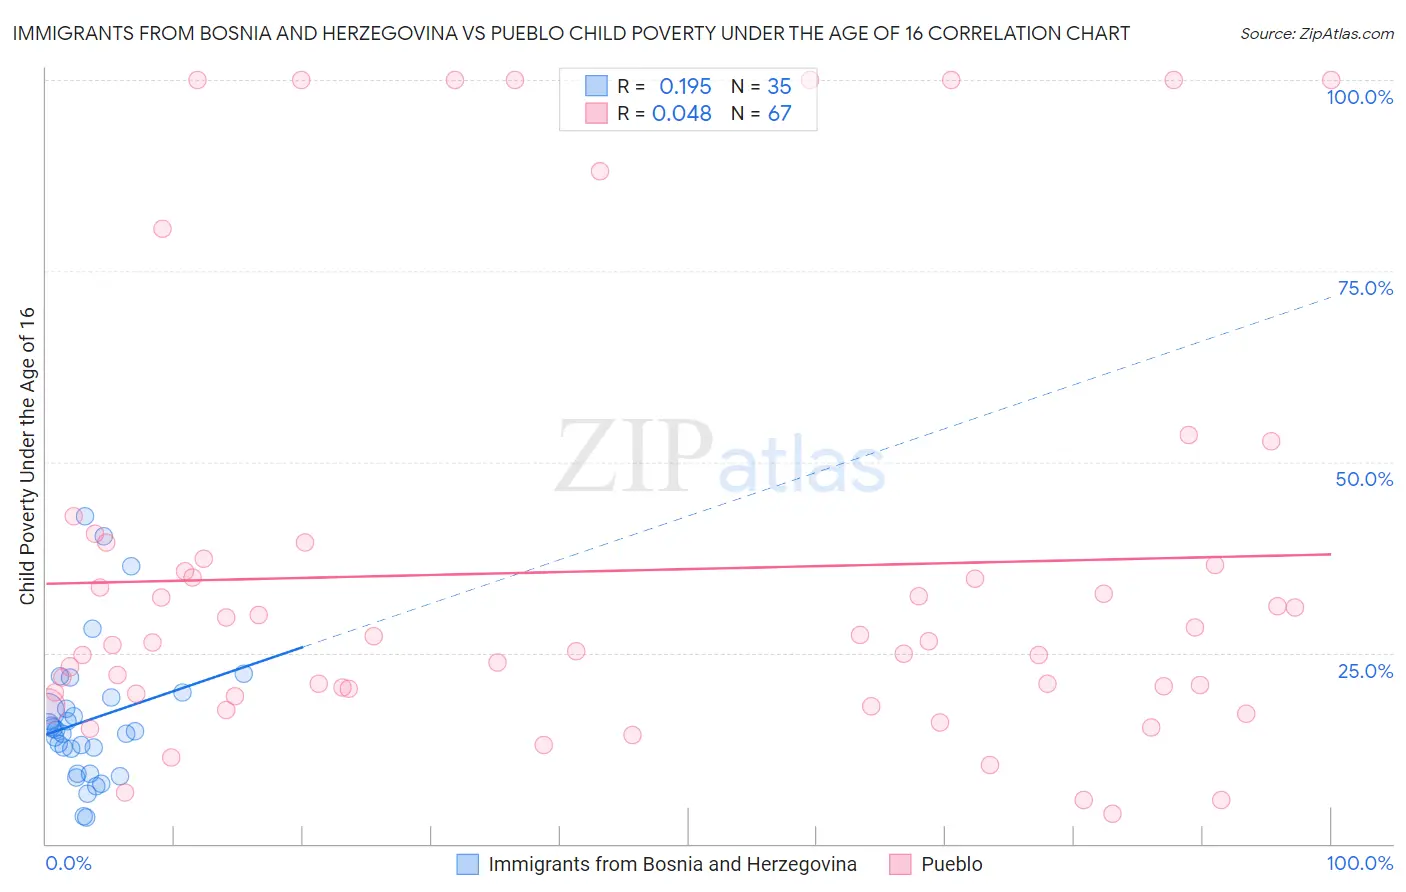 Immigrants from Bosnia and Herzegovina vs Pueblo Child Poverty Under the Age of 16